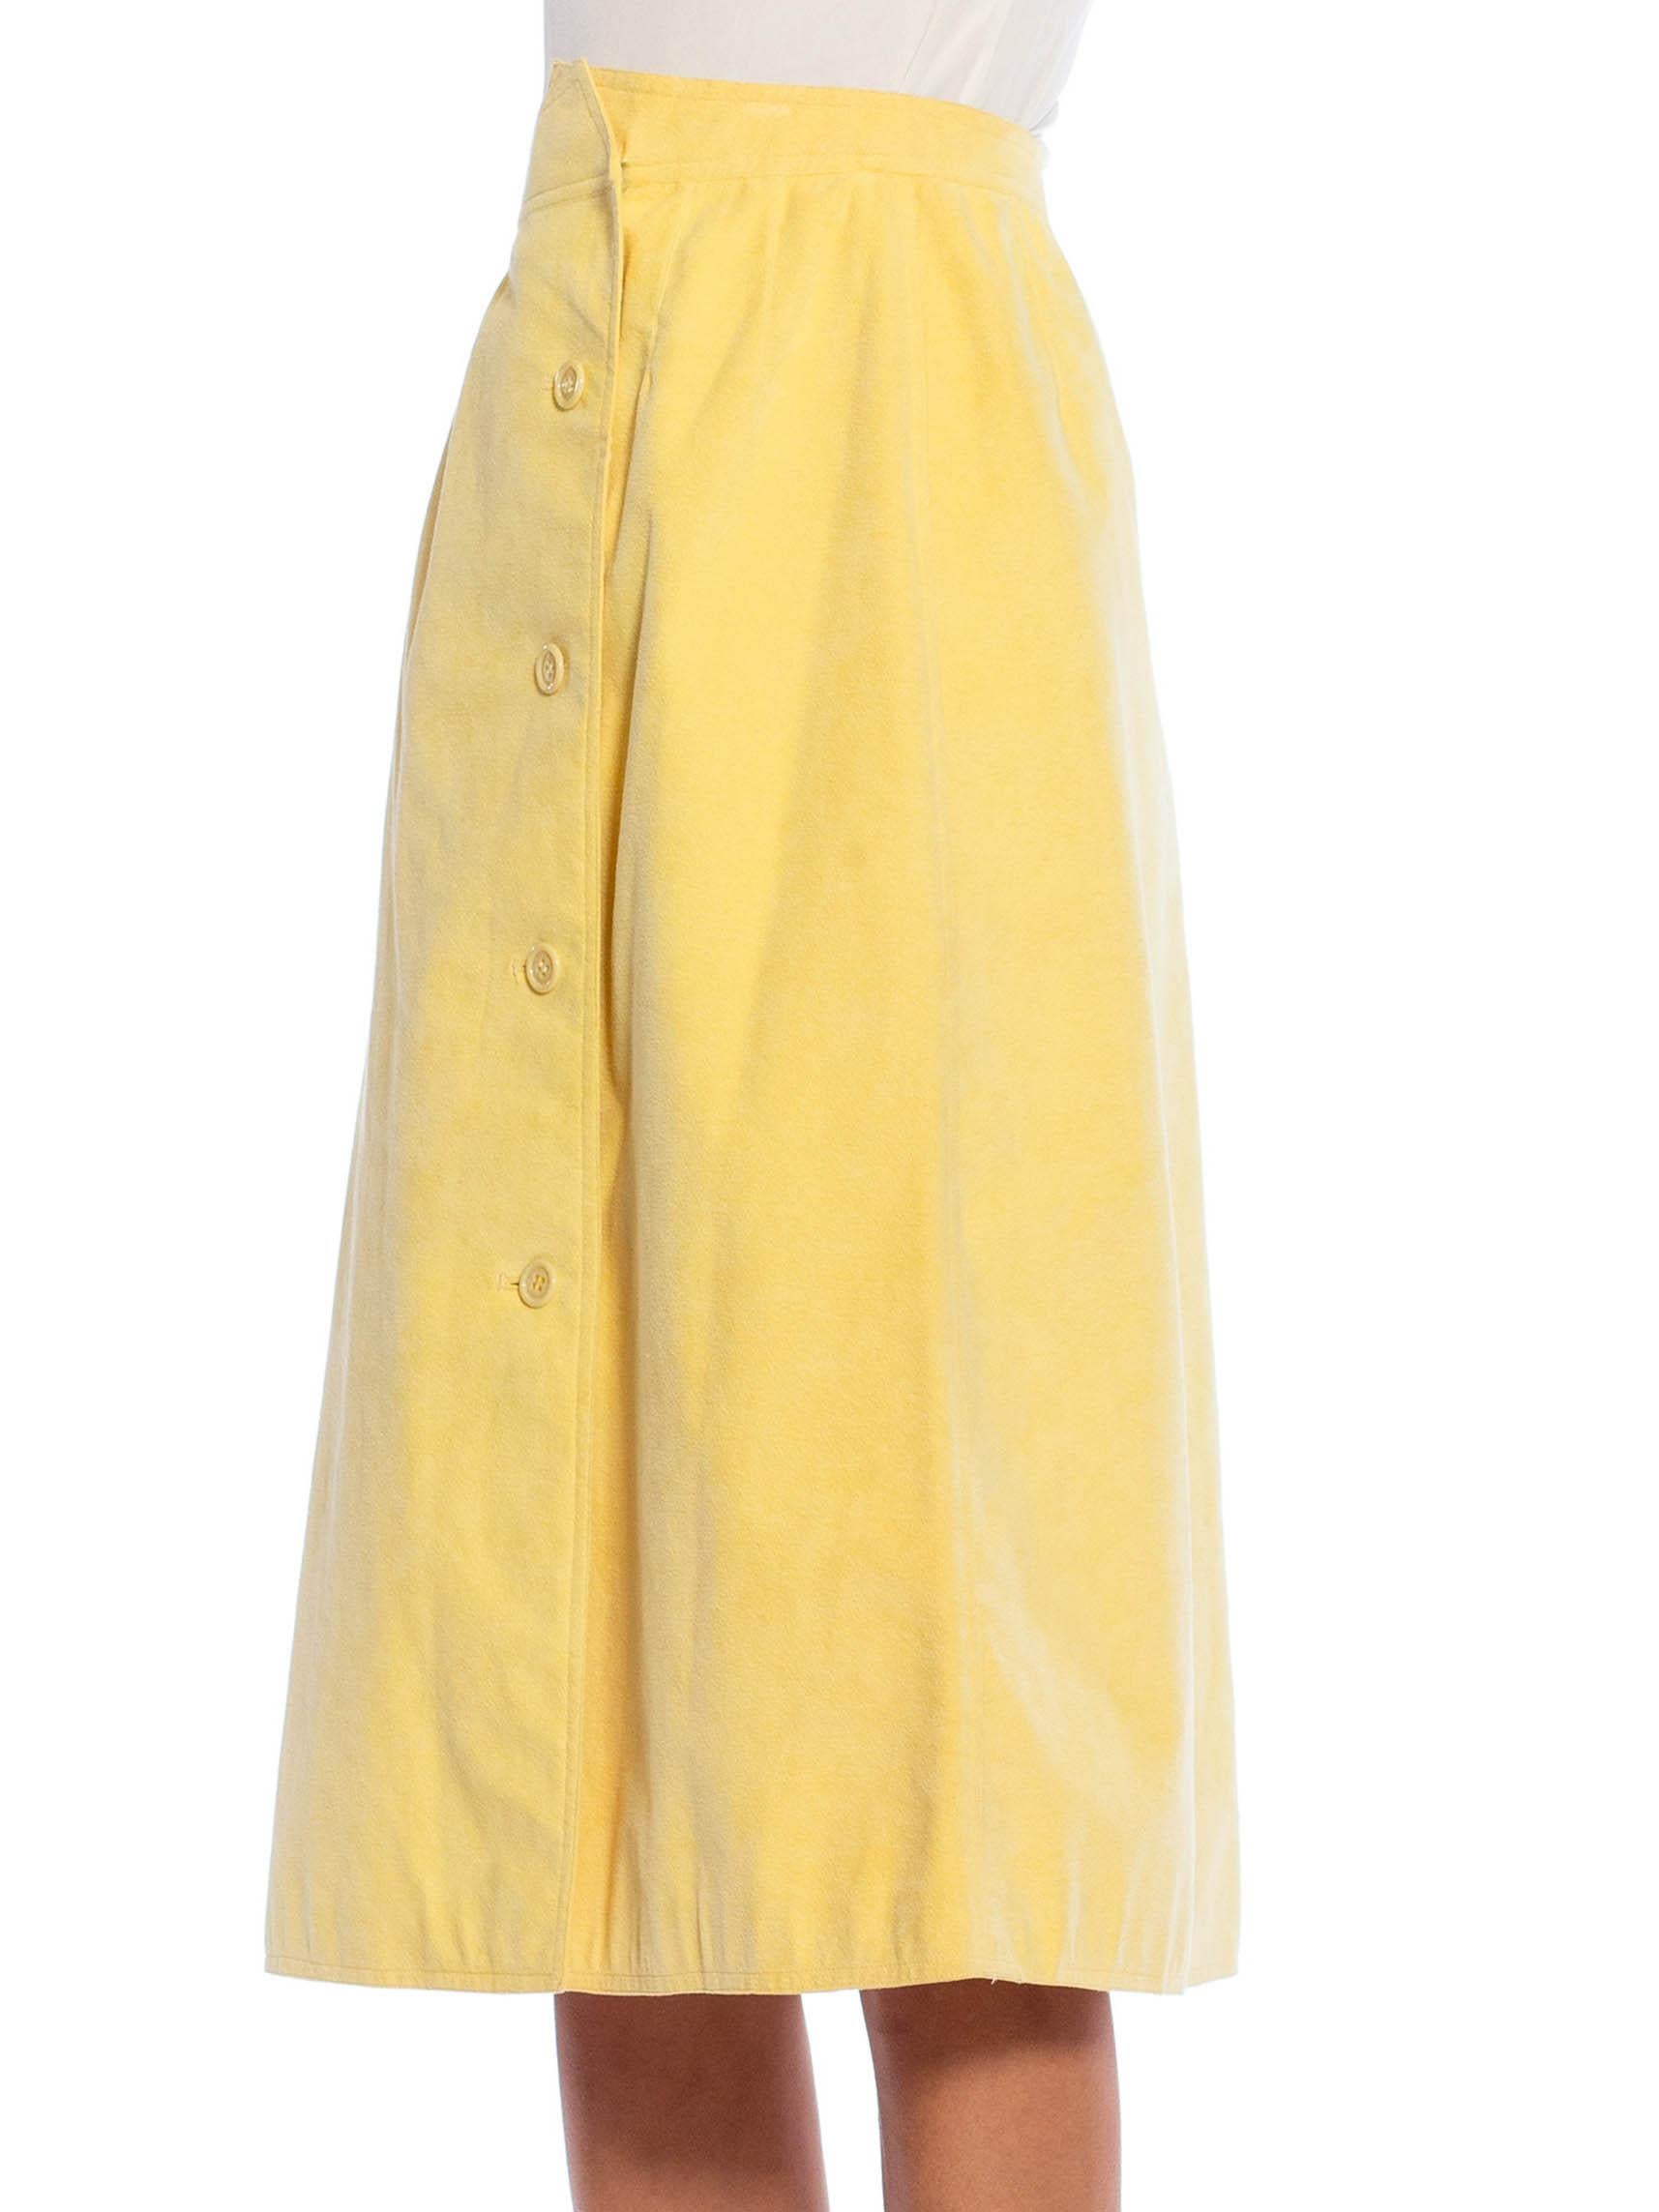 Women's 1970S HALSTON Butter Yellow Poly Blend Ultrasuede Skirt With Pockets